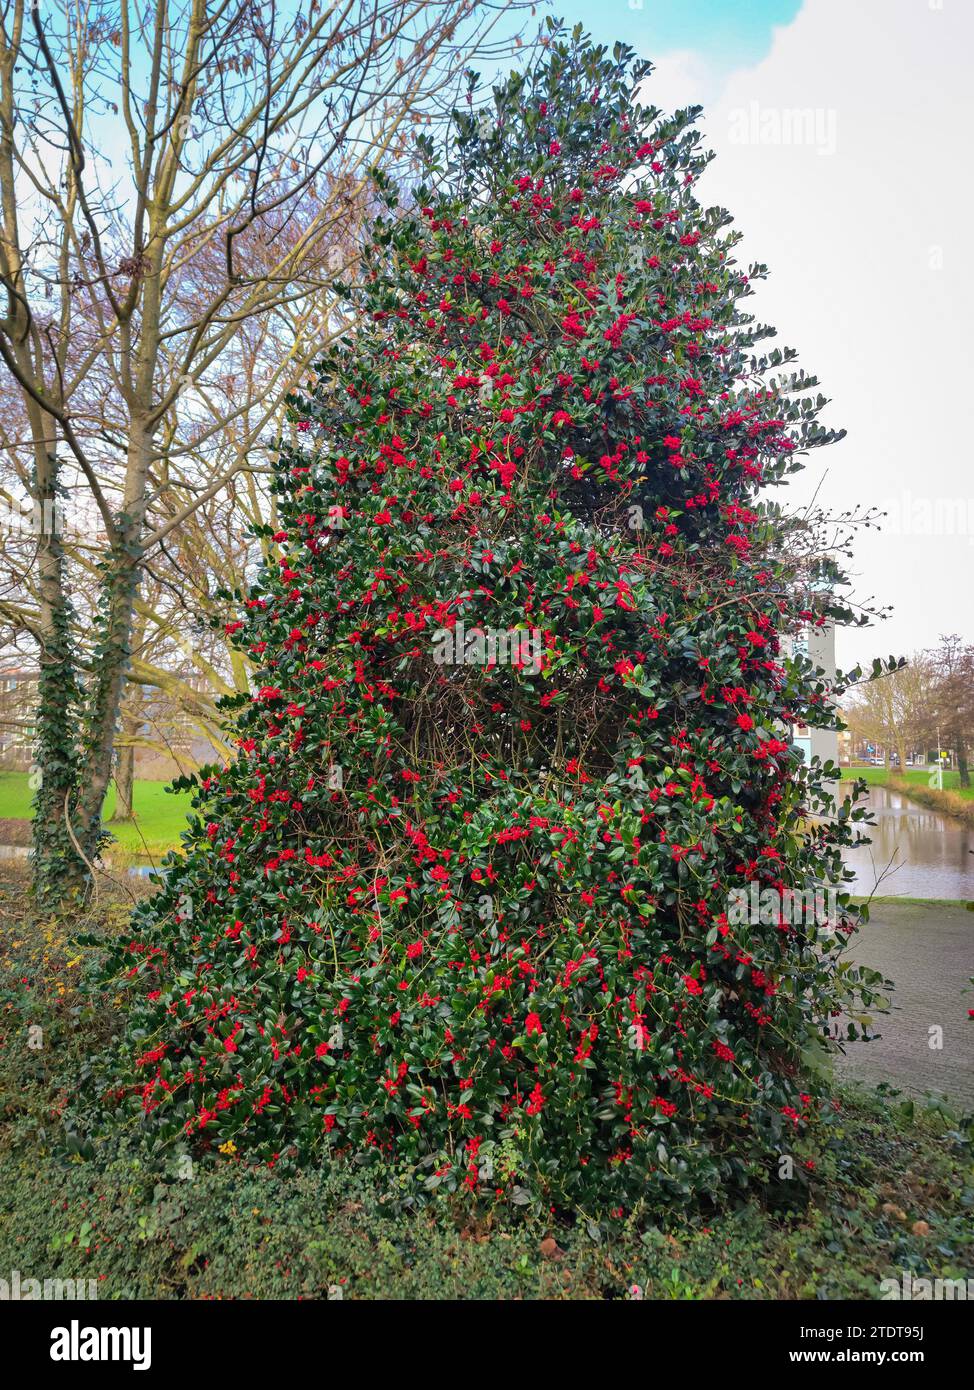 Common holly tree (Ilex aquifolium) in pyramidal shape with red colored berries. Stock Photo